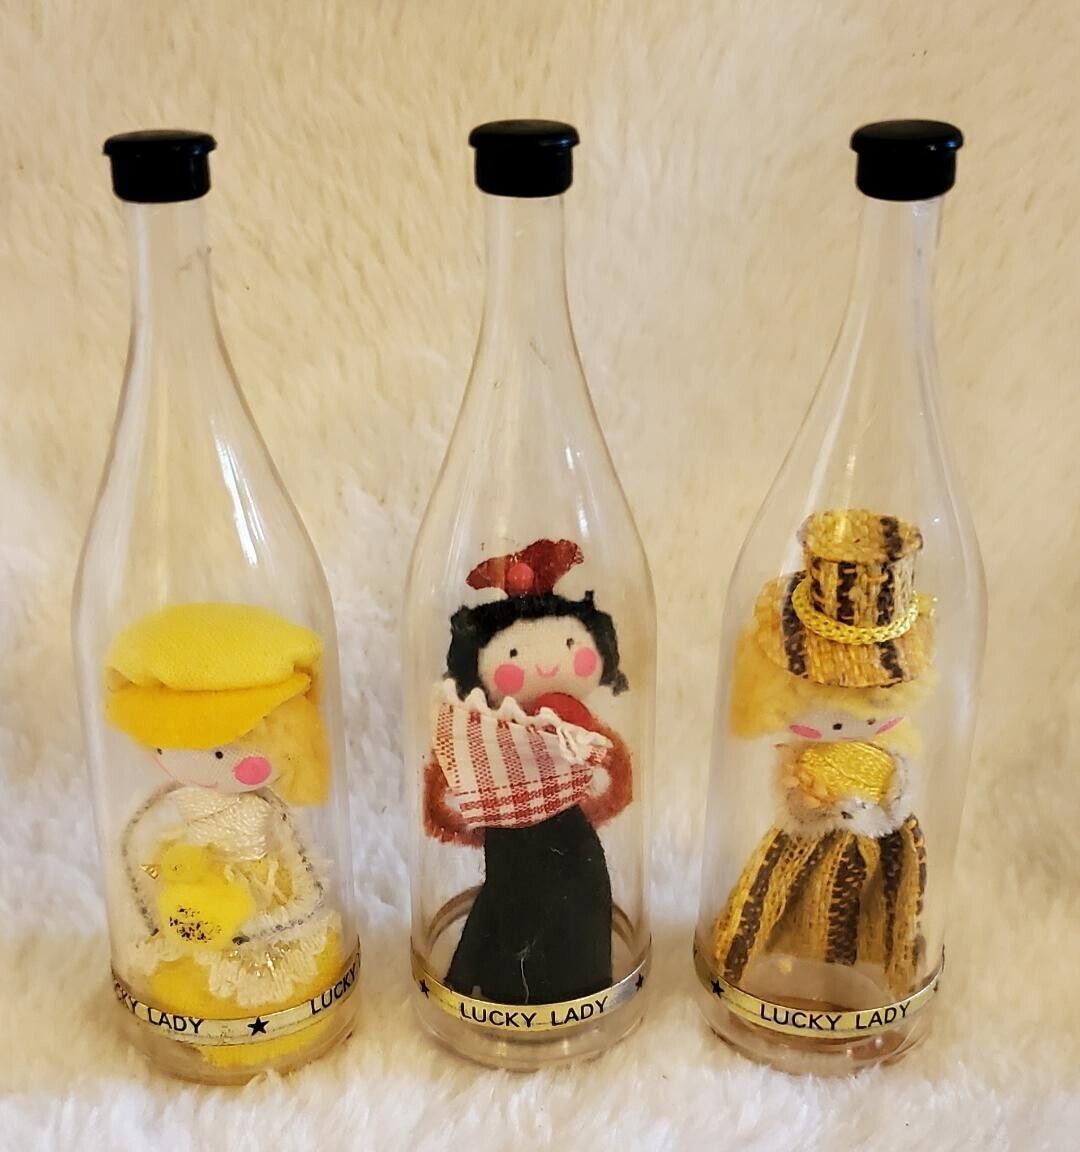 Rare Vintage Miniature Lucky Lady Dolls in Bottles (3)